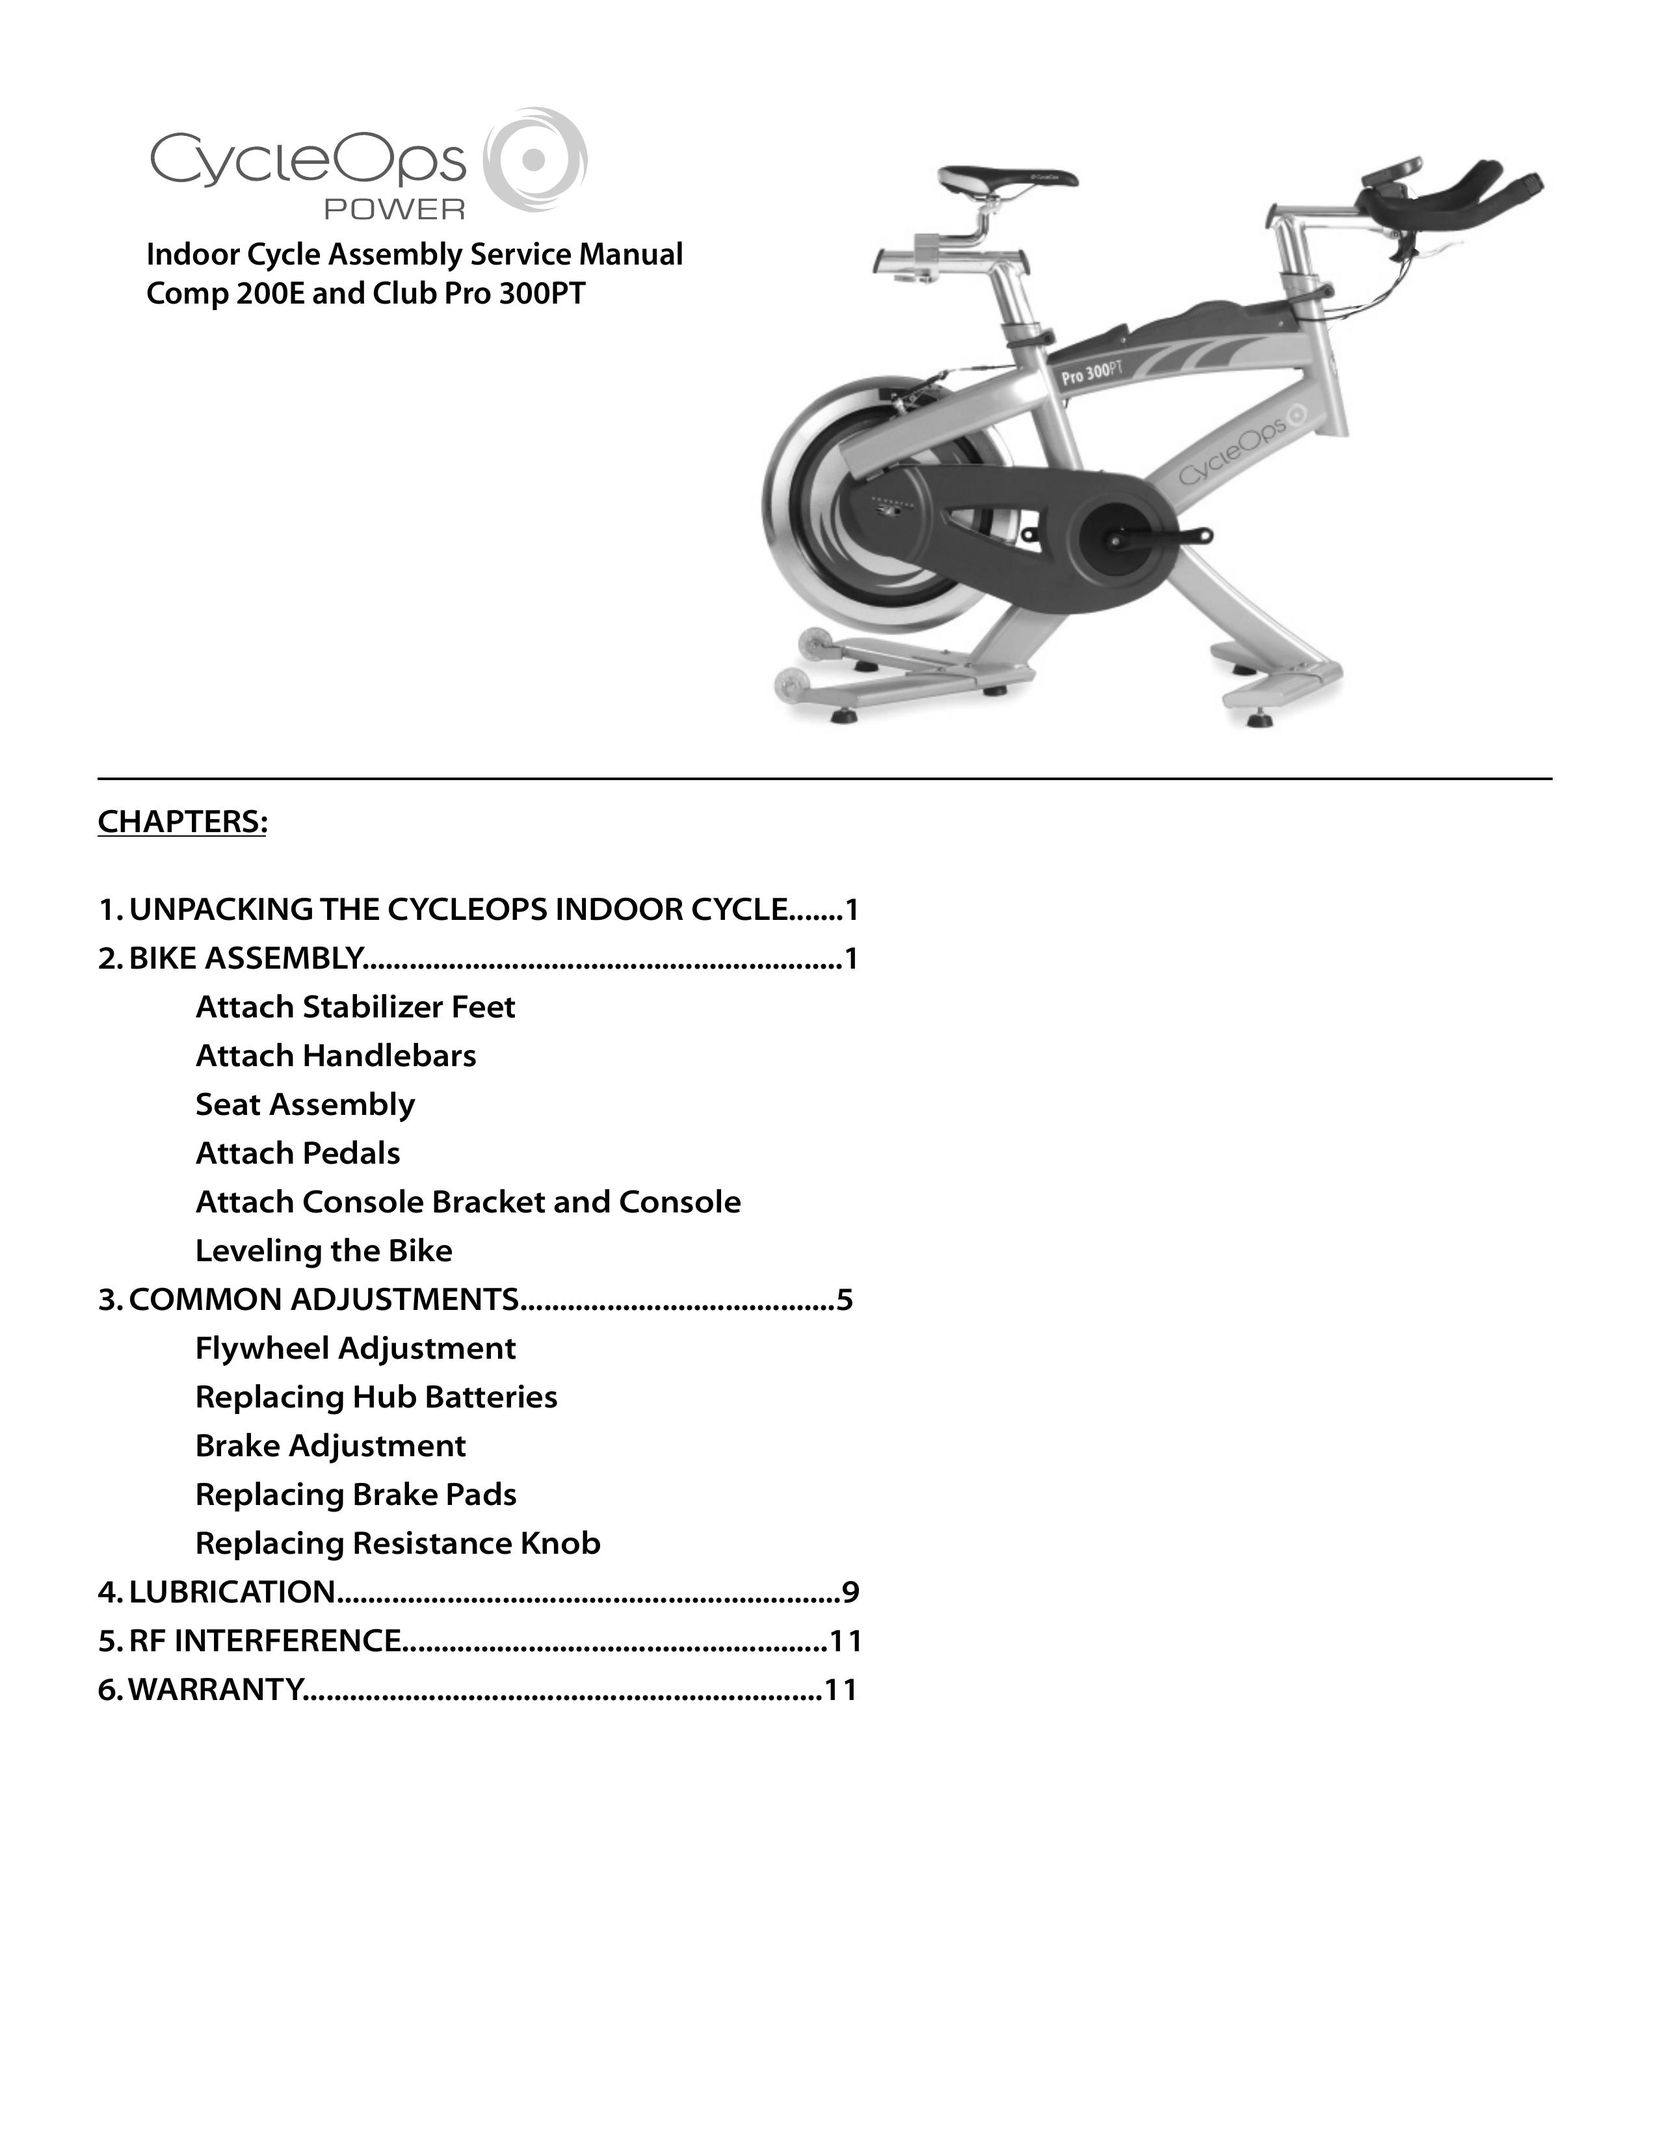 CycleOps Club Pro 300PT Home Gym User Manual